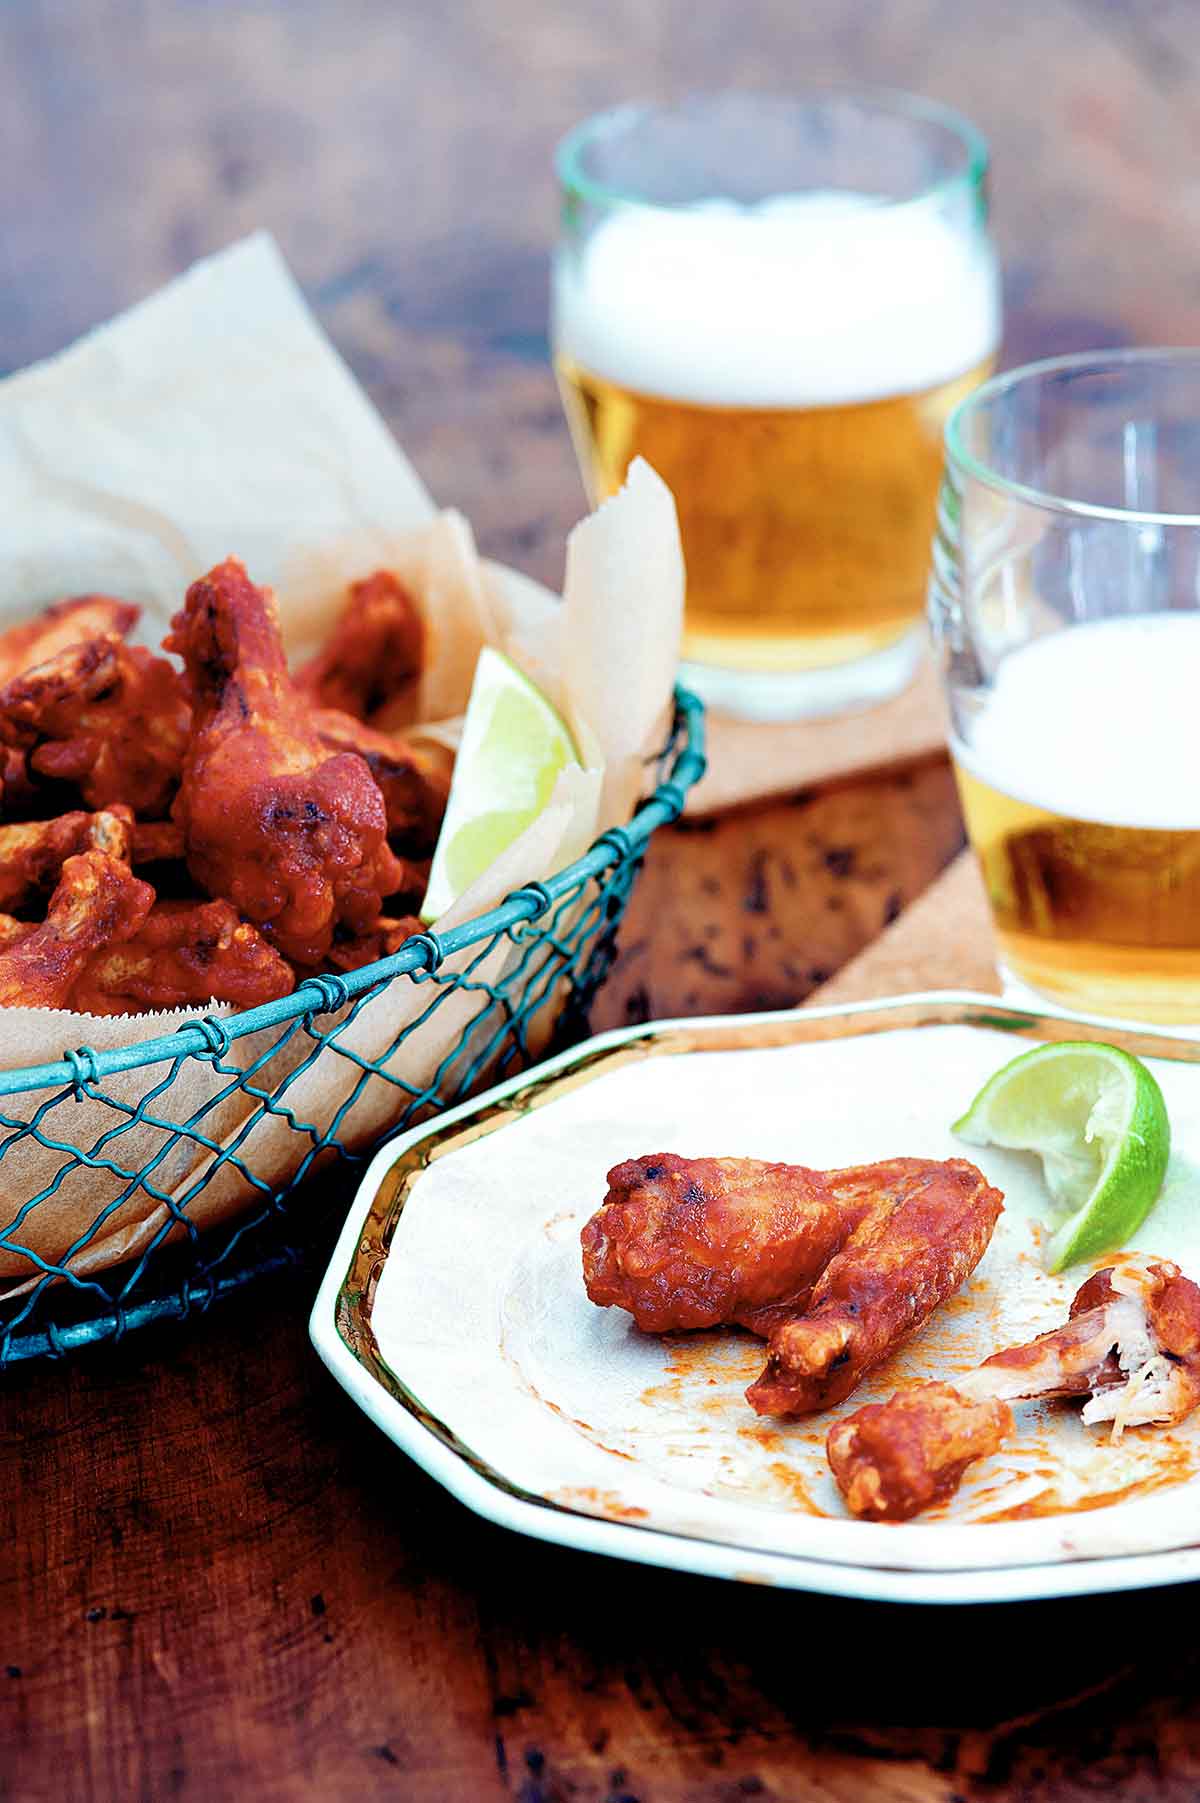 A basket of Sriracha chicken wings, two glasses of beer, and a plate with one eaten and one uneaten chicken wing and a wedge of lime.